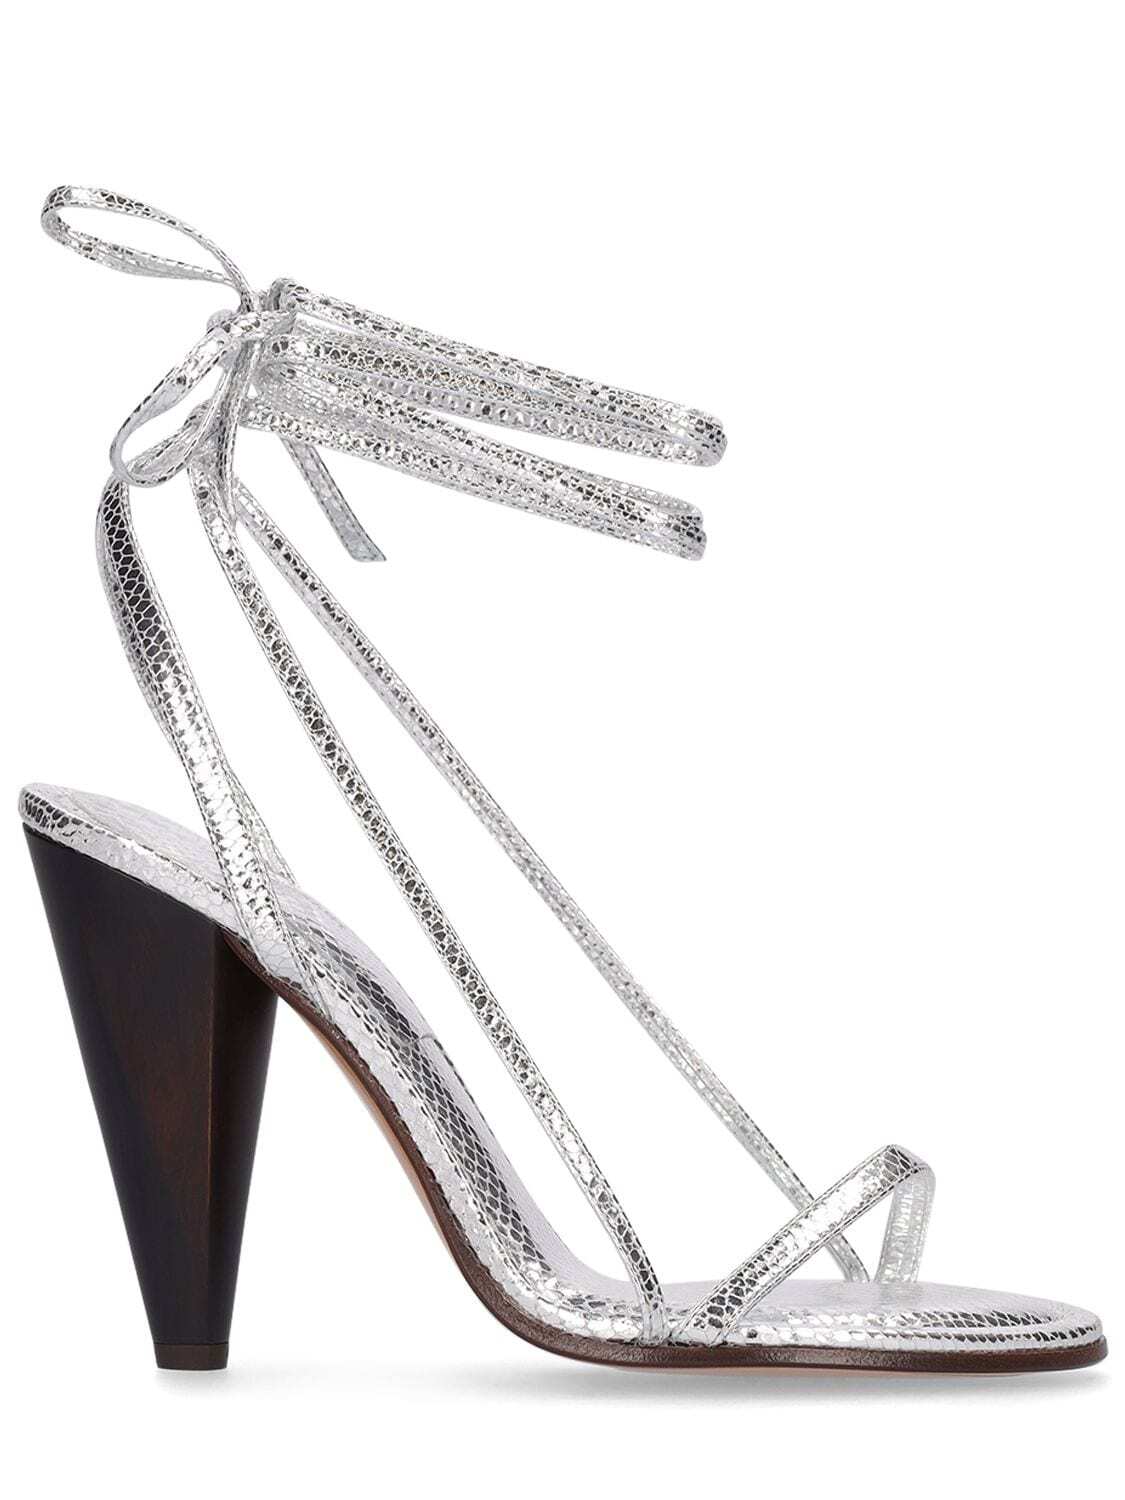 ISABEL MARANT 105mm Aliza Metallic Leather Sandals in silver